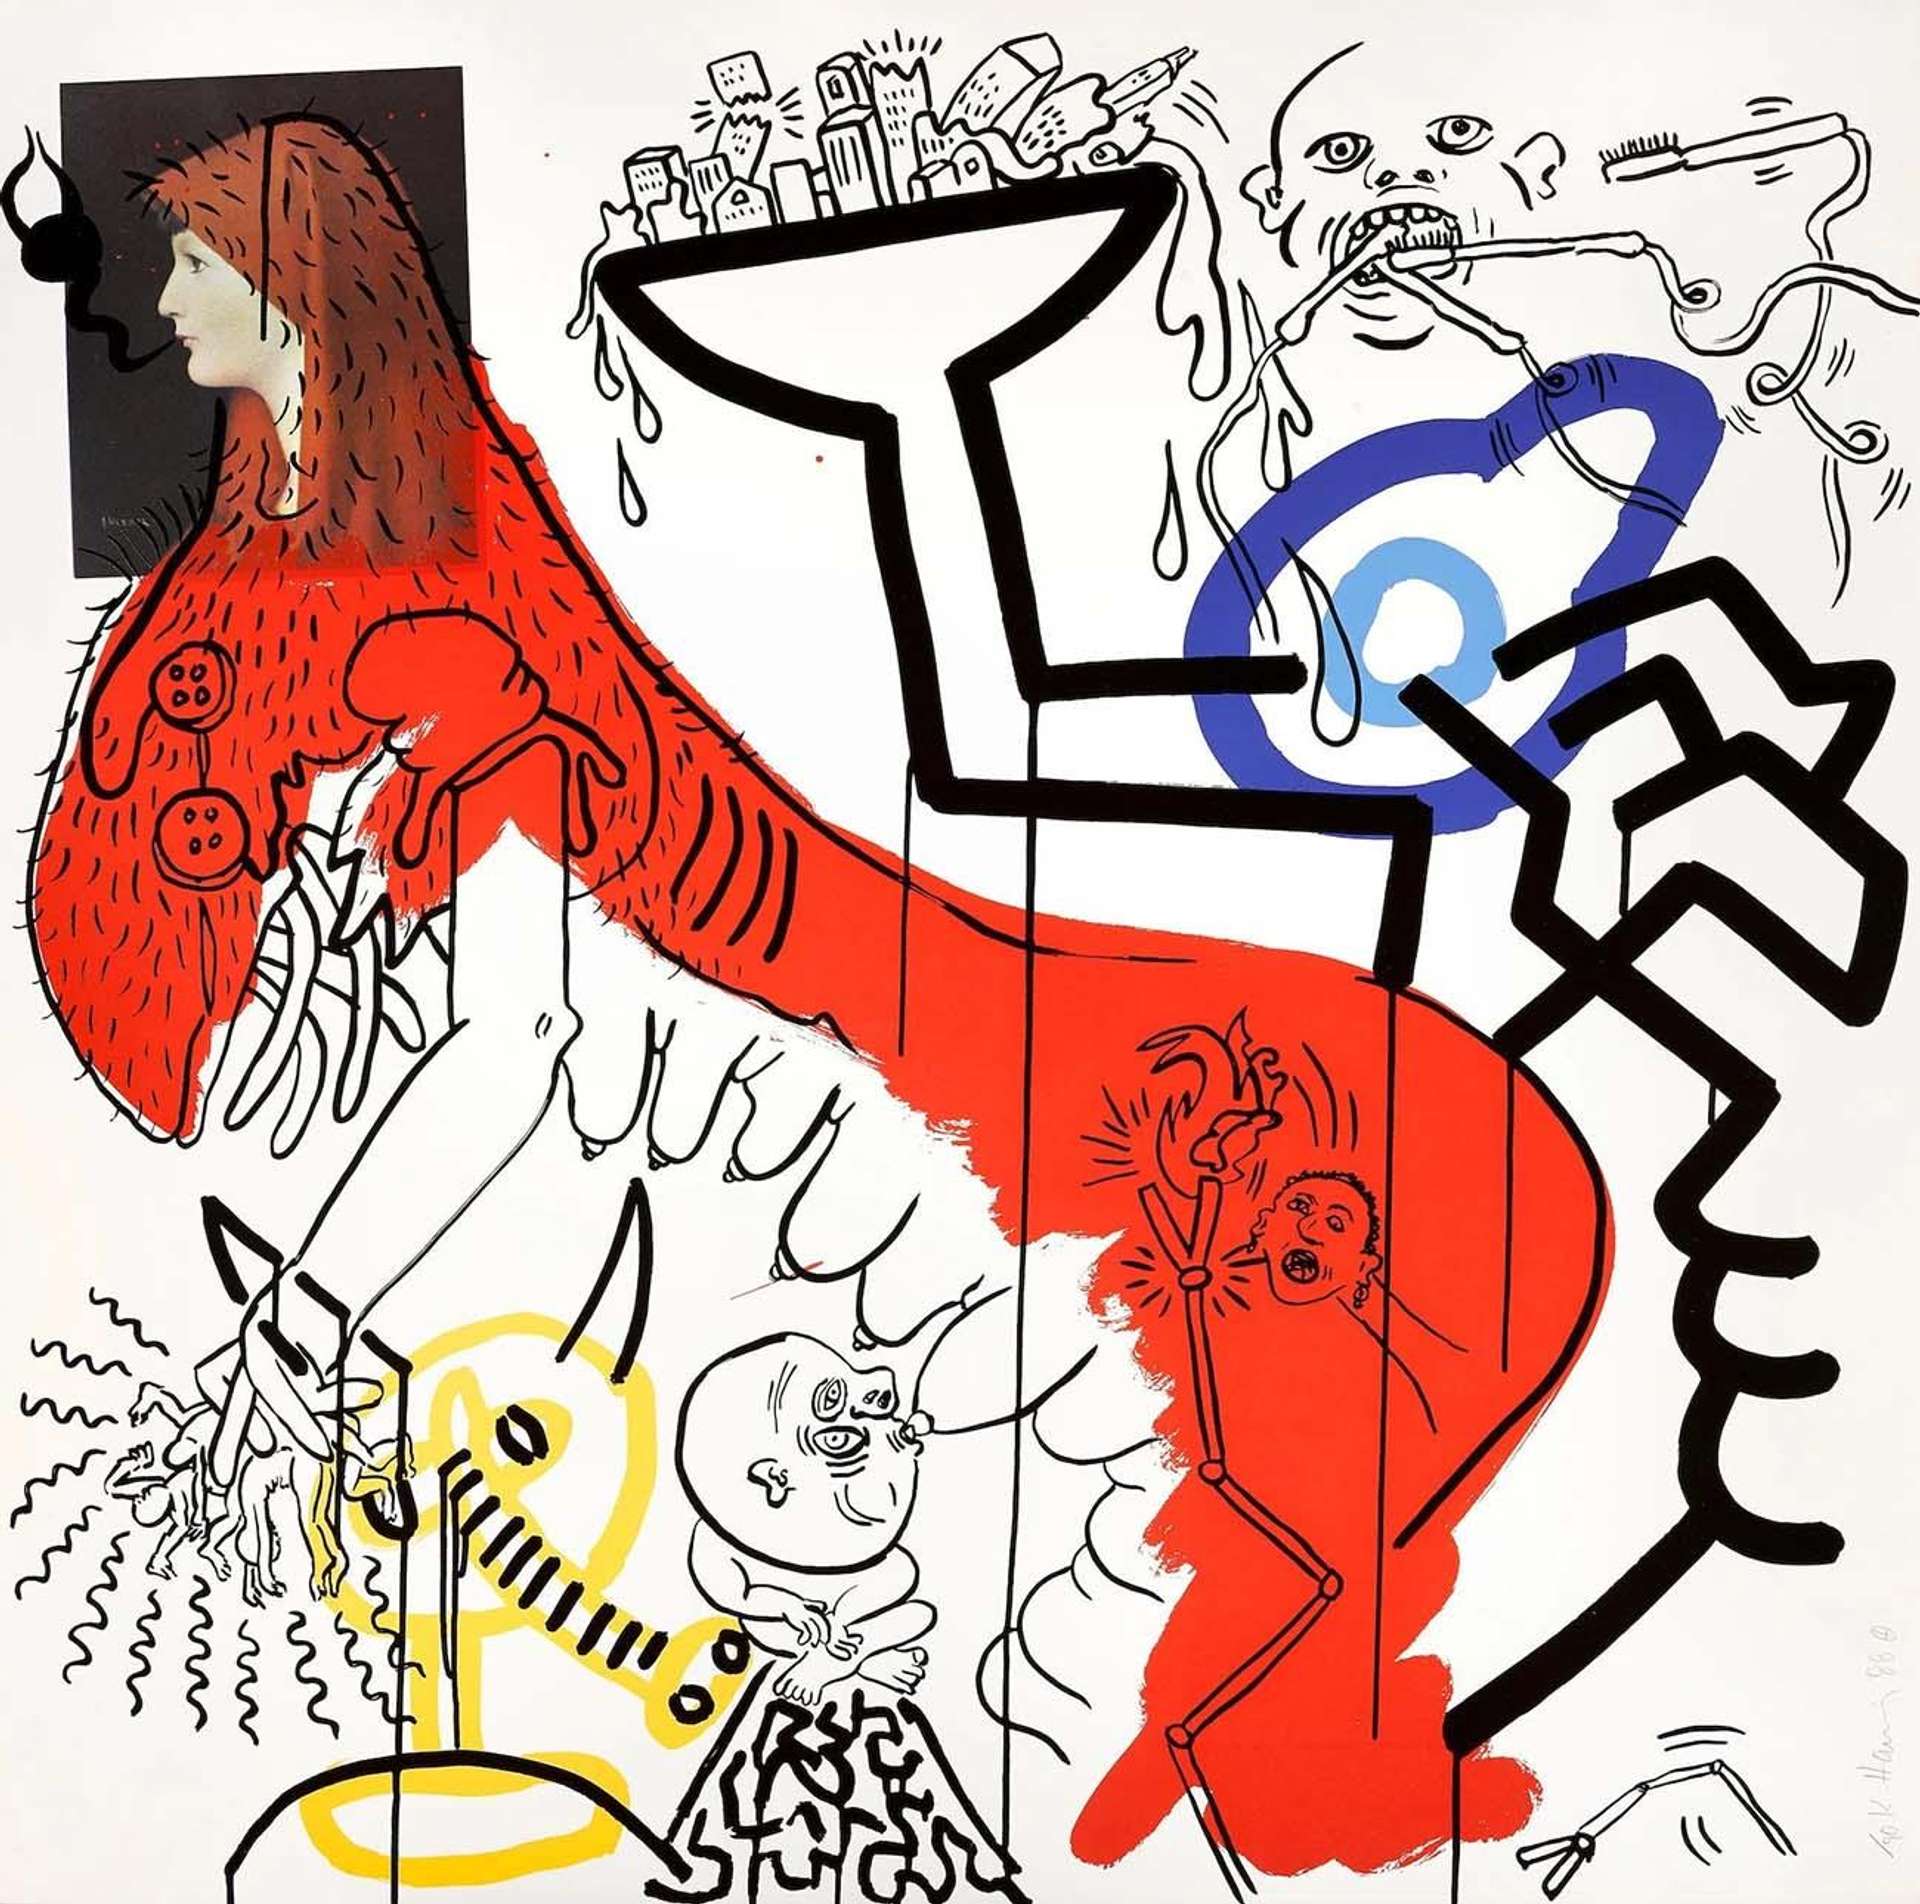 Keith Haring’s Apocalypse 4. A Pop Art screenprint collage featuring animated, surrealist characters. 